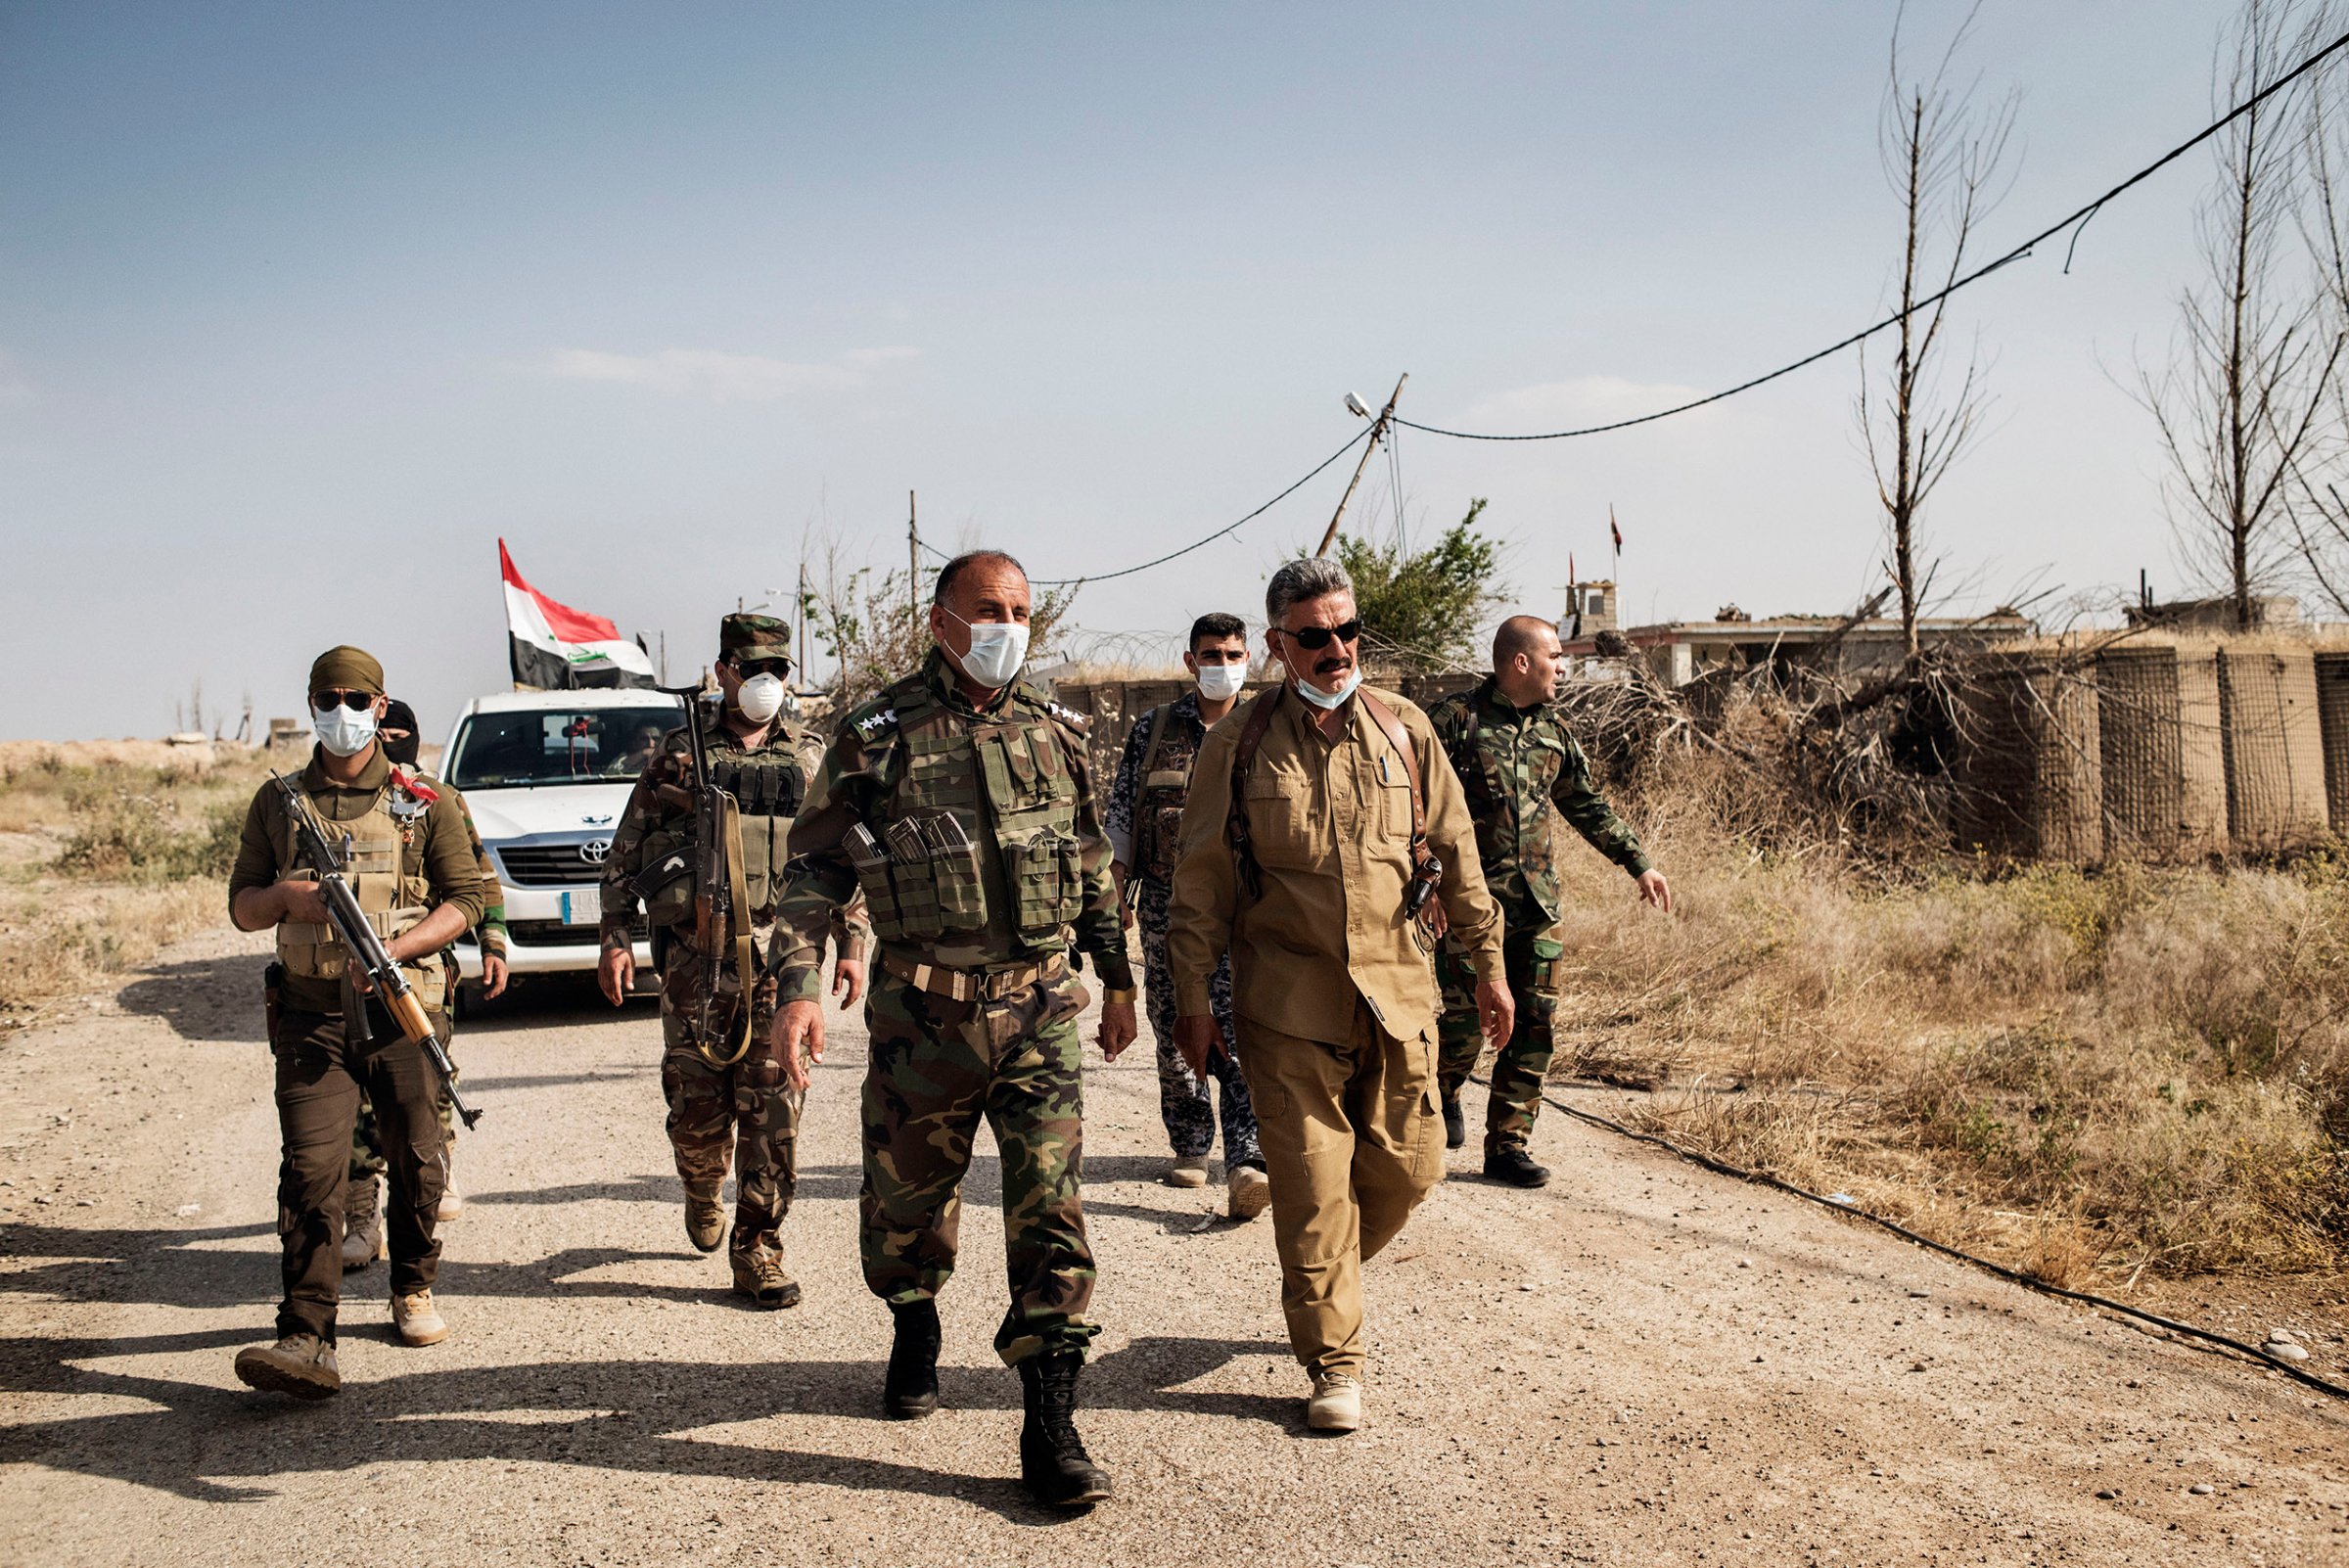 Zaki Kamal Hussein, commander of a local Turkmen-led branch of Iraq's Popular Mobilization militias, and police official Mahmoud Ali inspect the site of an alleged chemical weapons attack in the town of Bashir, Iraq, May 10, 2016.